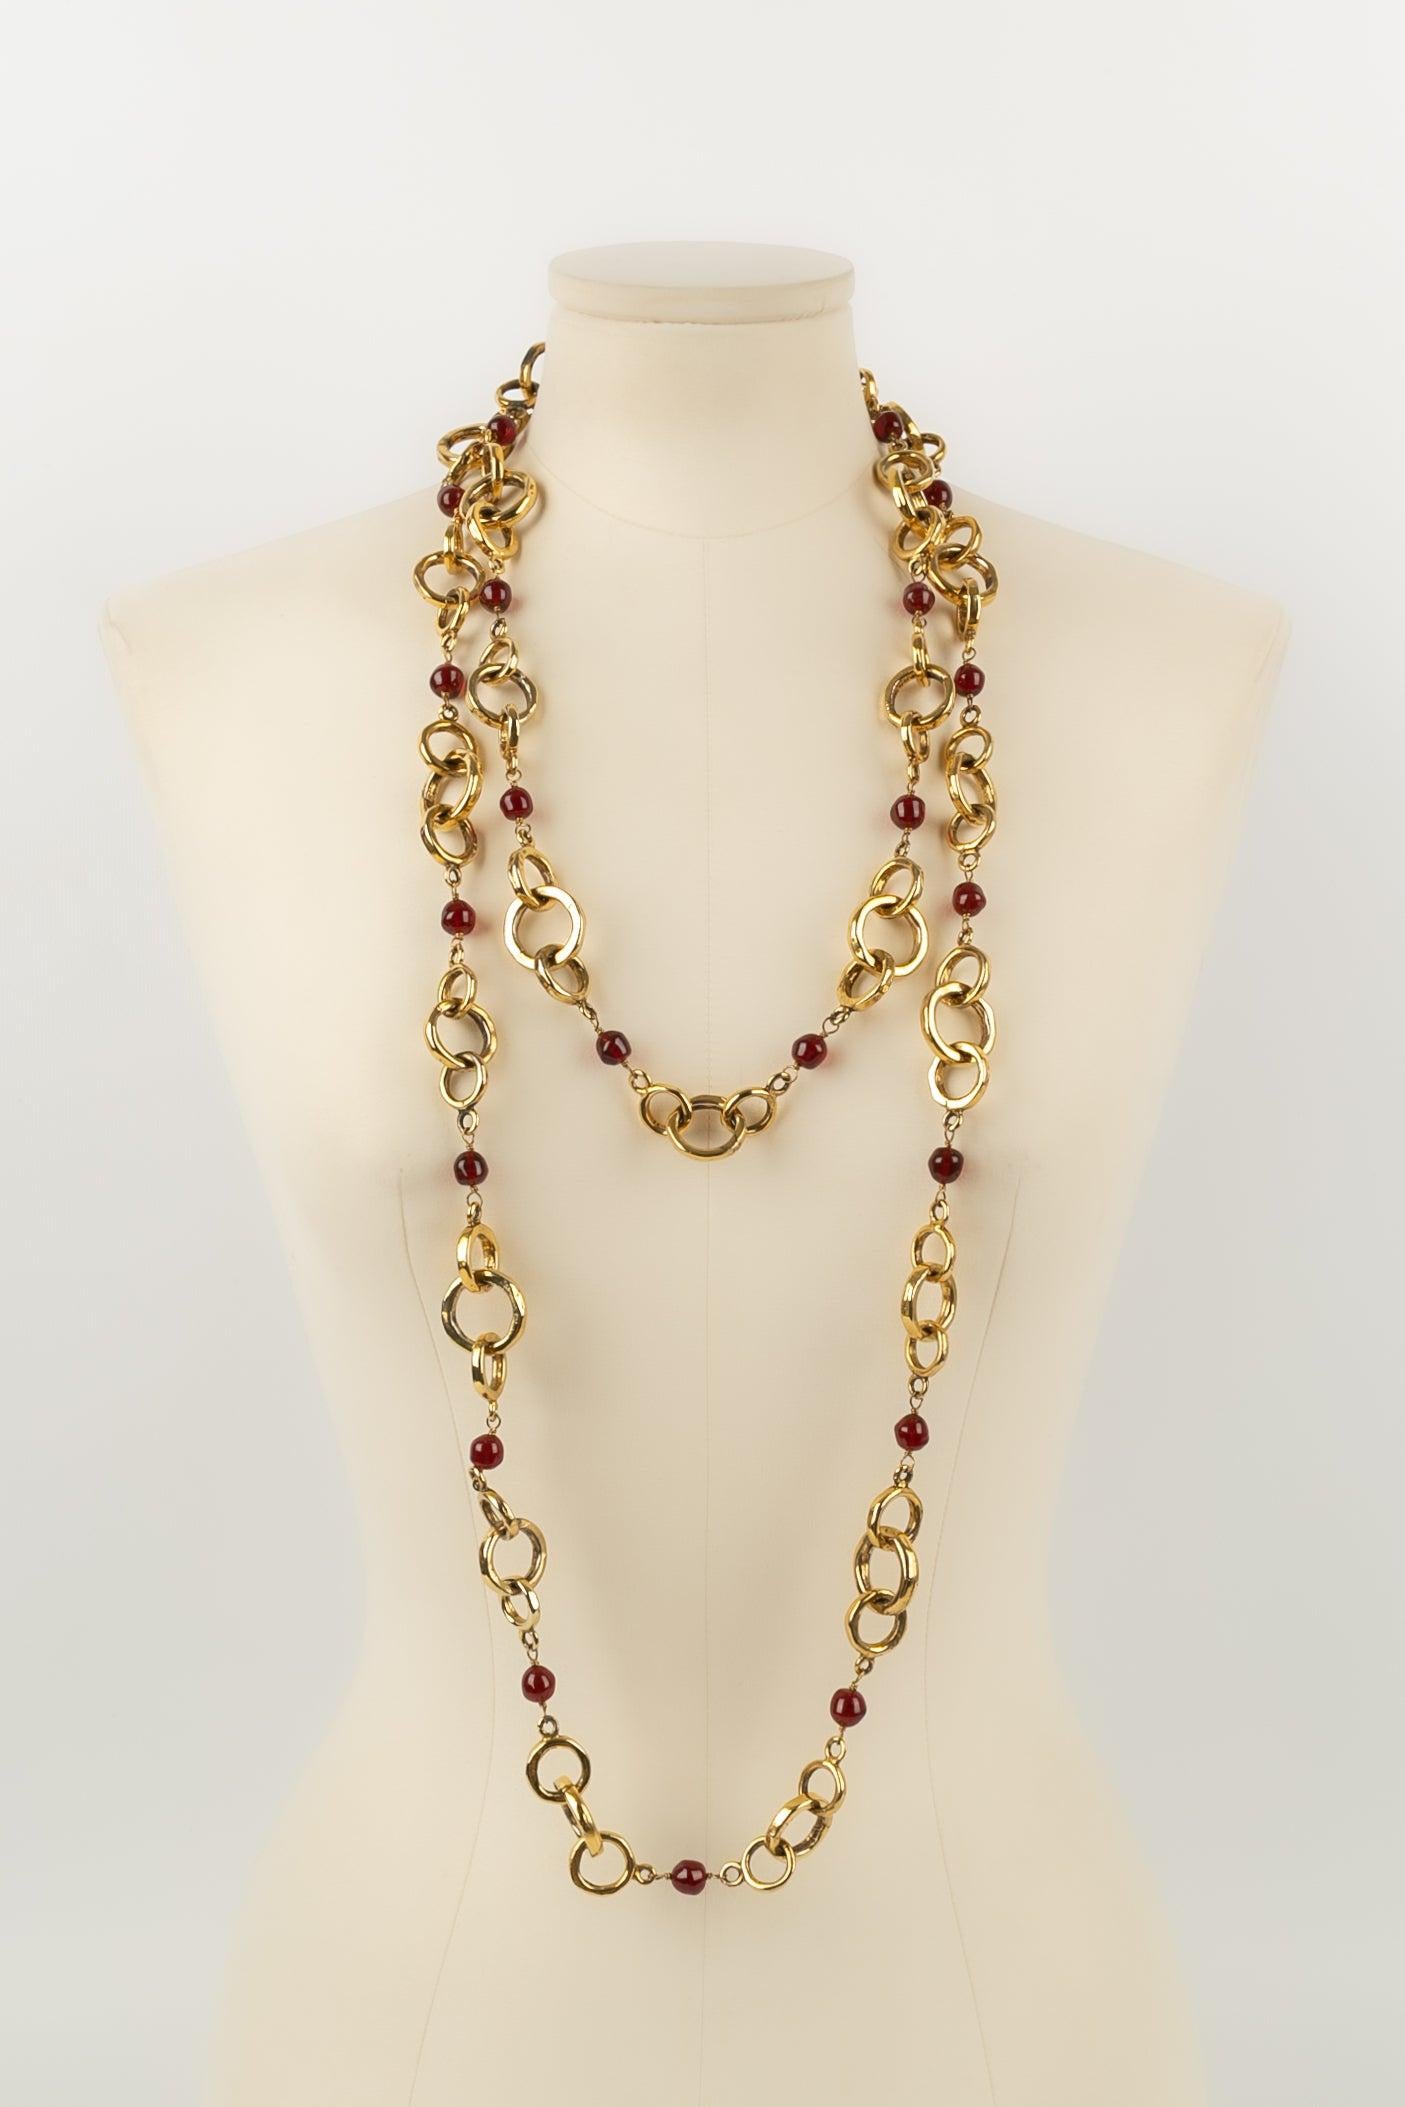 Chanel Long Necklace in Gold Metal and Red Glass Beads, 1984 In Excellent Condition For Sale In SAINT-OUEN-SUR-SEINE, FR